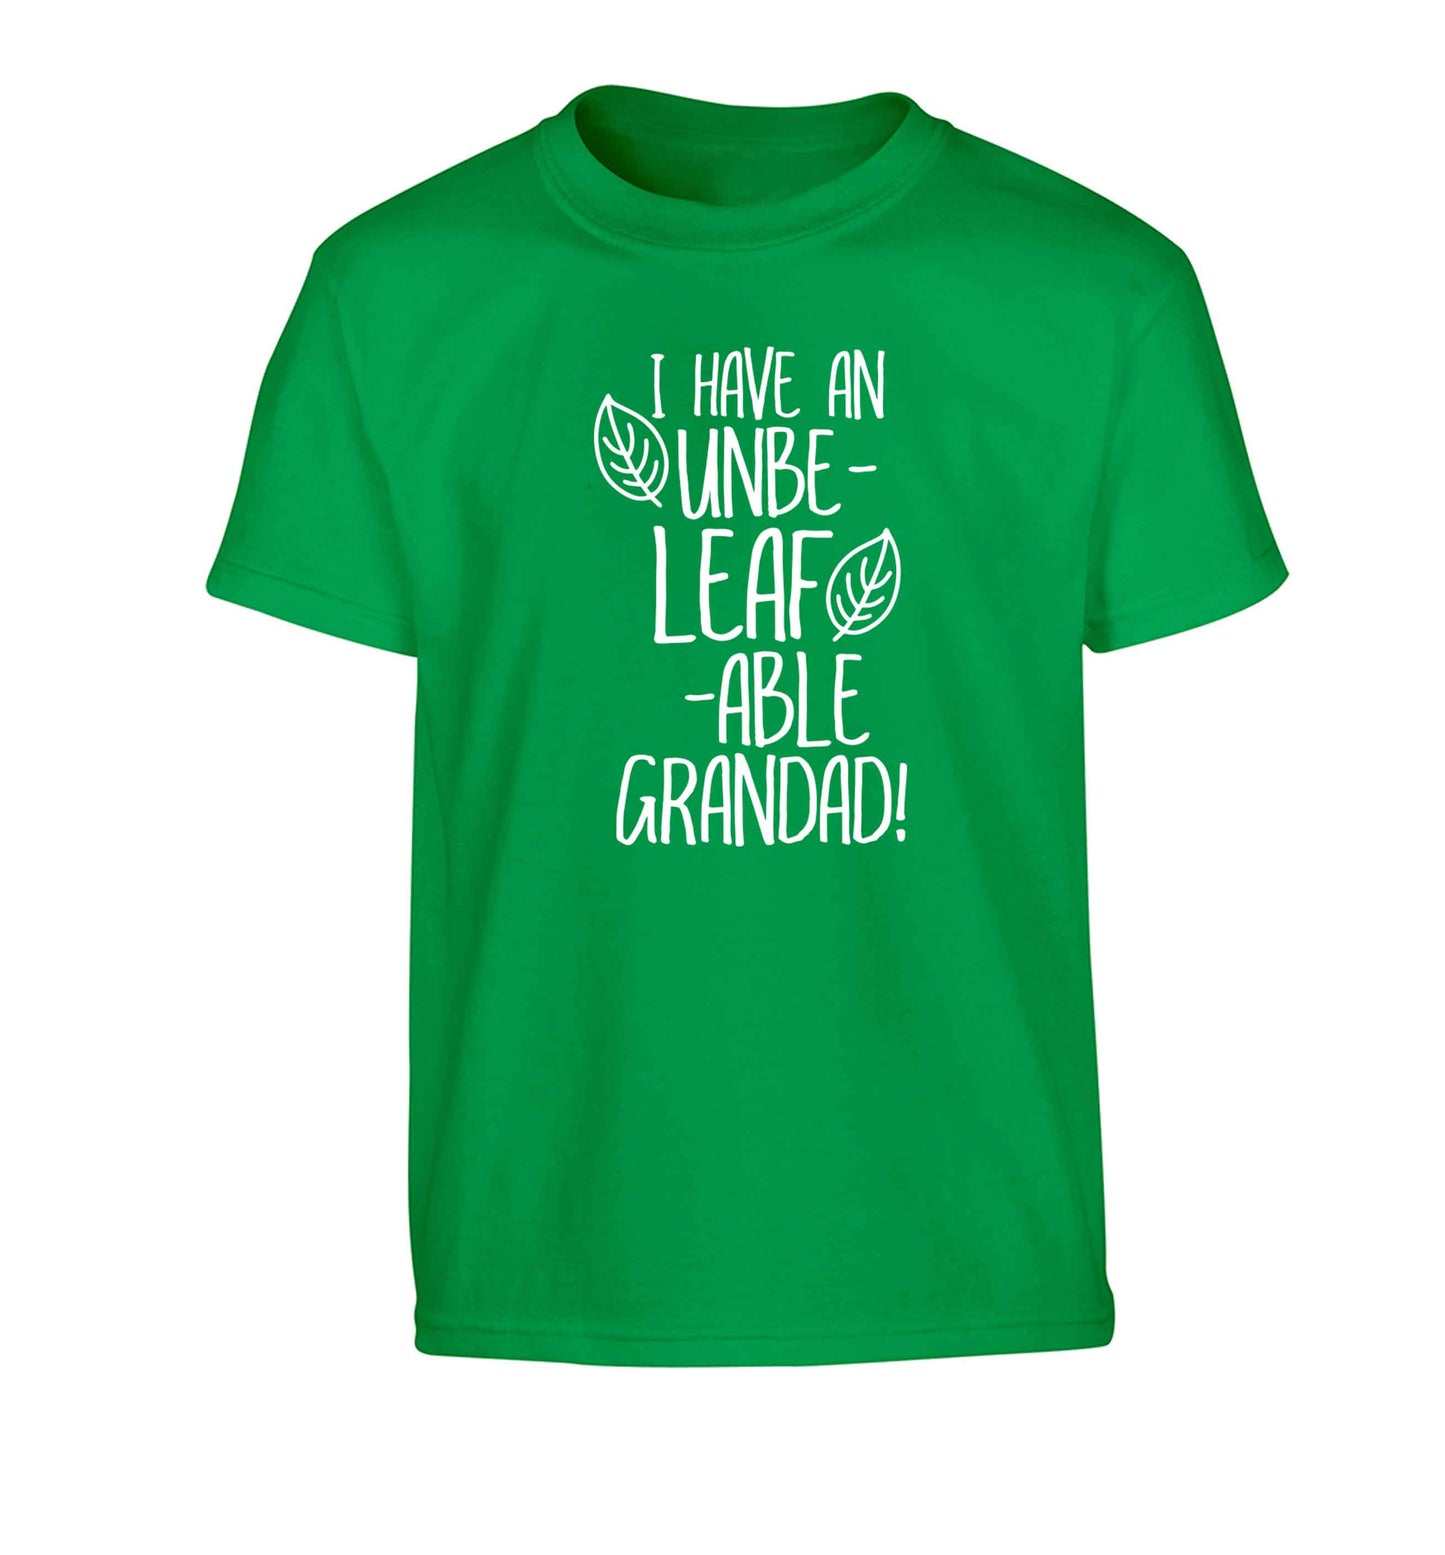 I have an unbe-leaf-able grandad Children's green Tshirt 12-13 Years